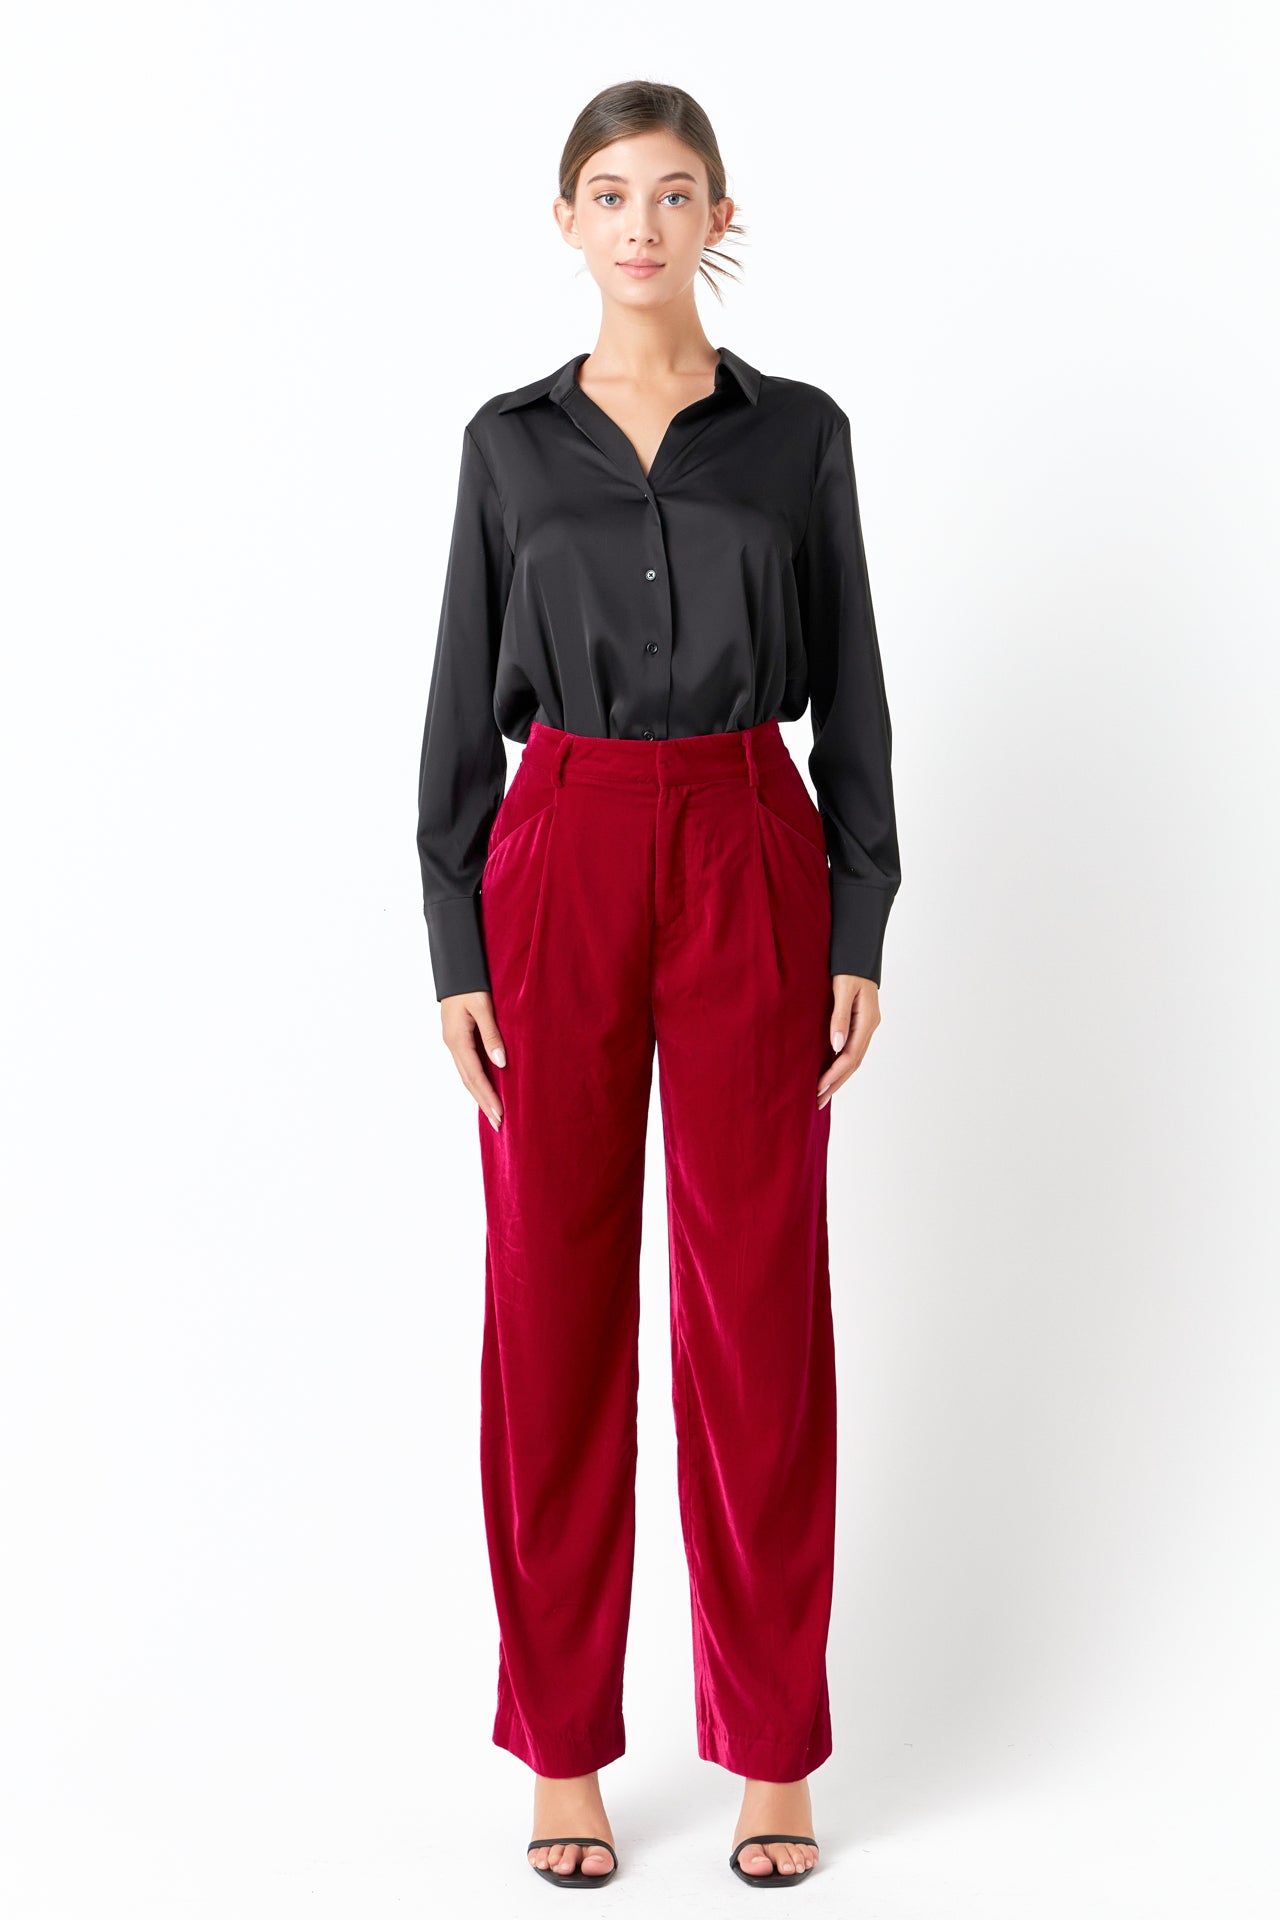 Endless Rose - High-Waisted Velvet Pants - Pants in Women's Clothing available at endlessrose.com